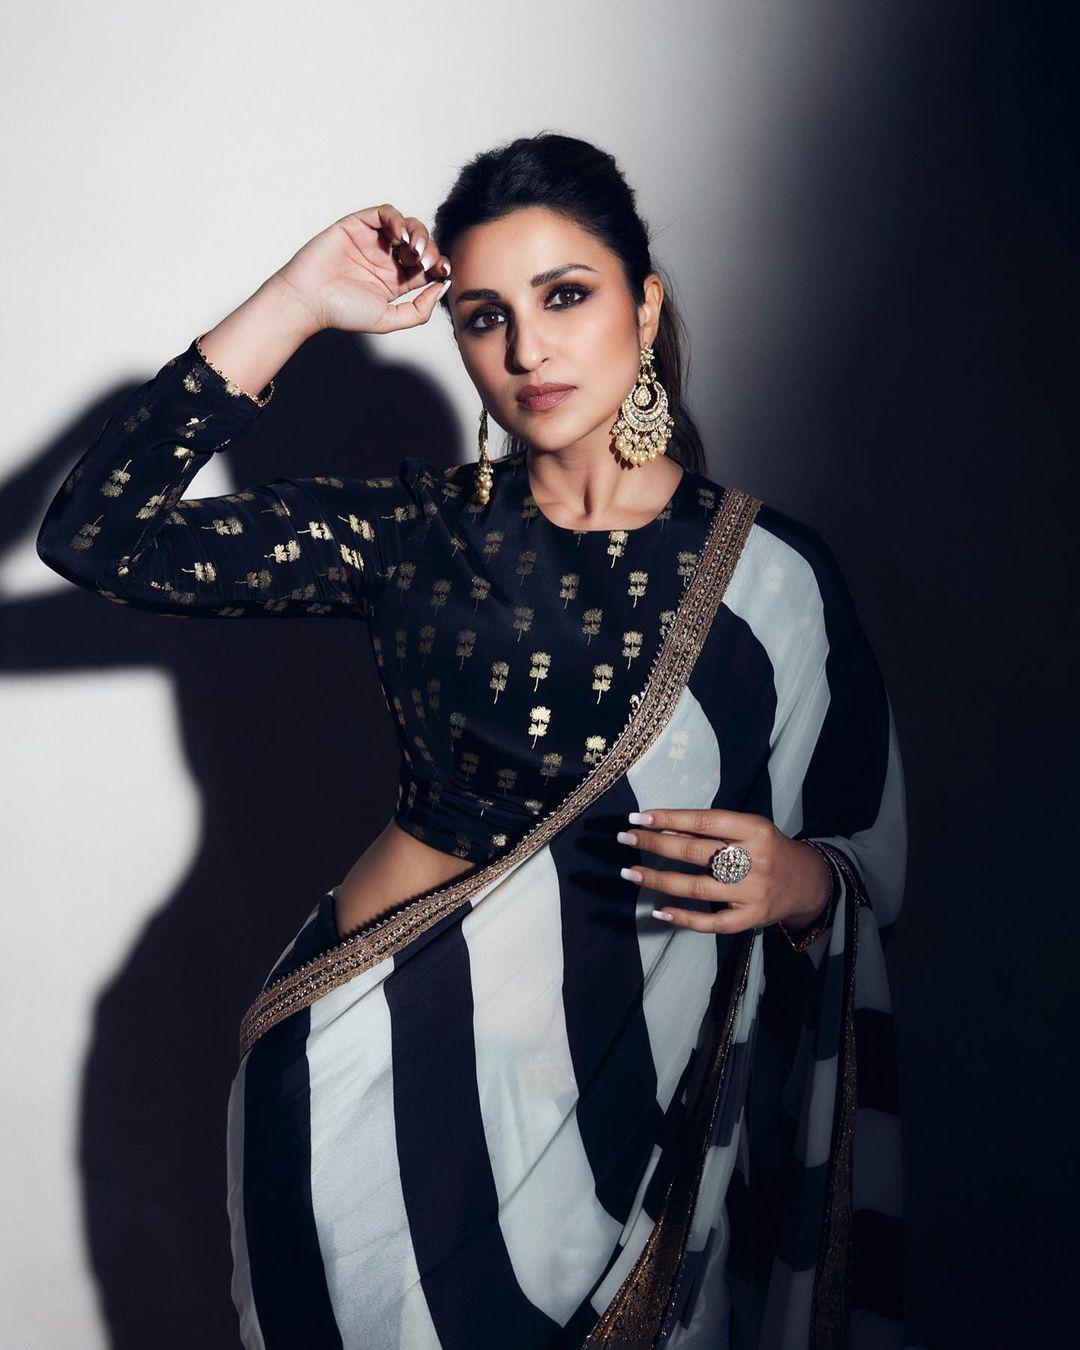 Parineeti tied her hair back in a ponytail, opting for minimal makeup. However, the dark and smoky touch to her eyes added a hint of confidence to her overall look